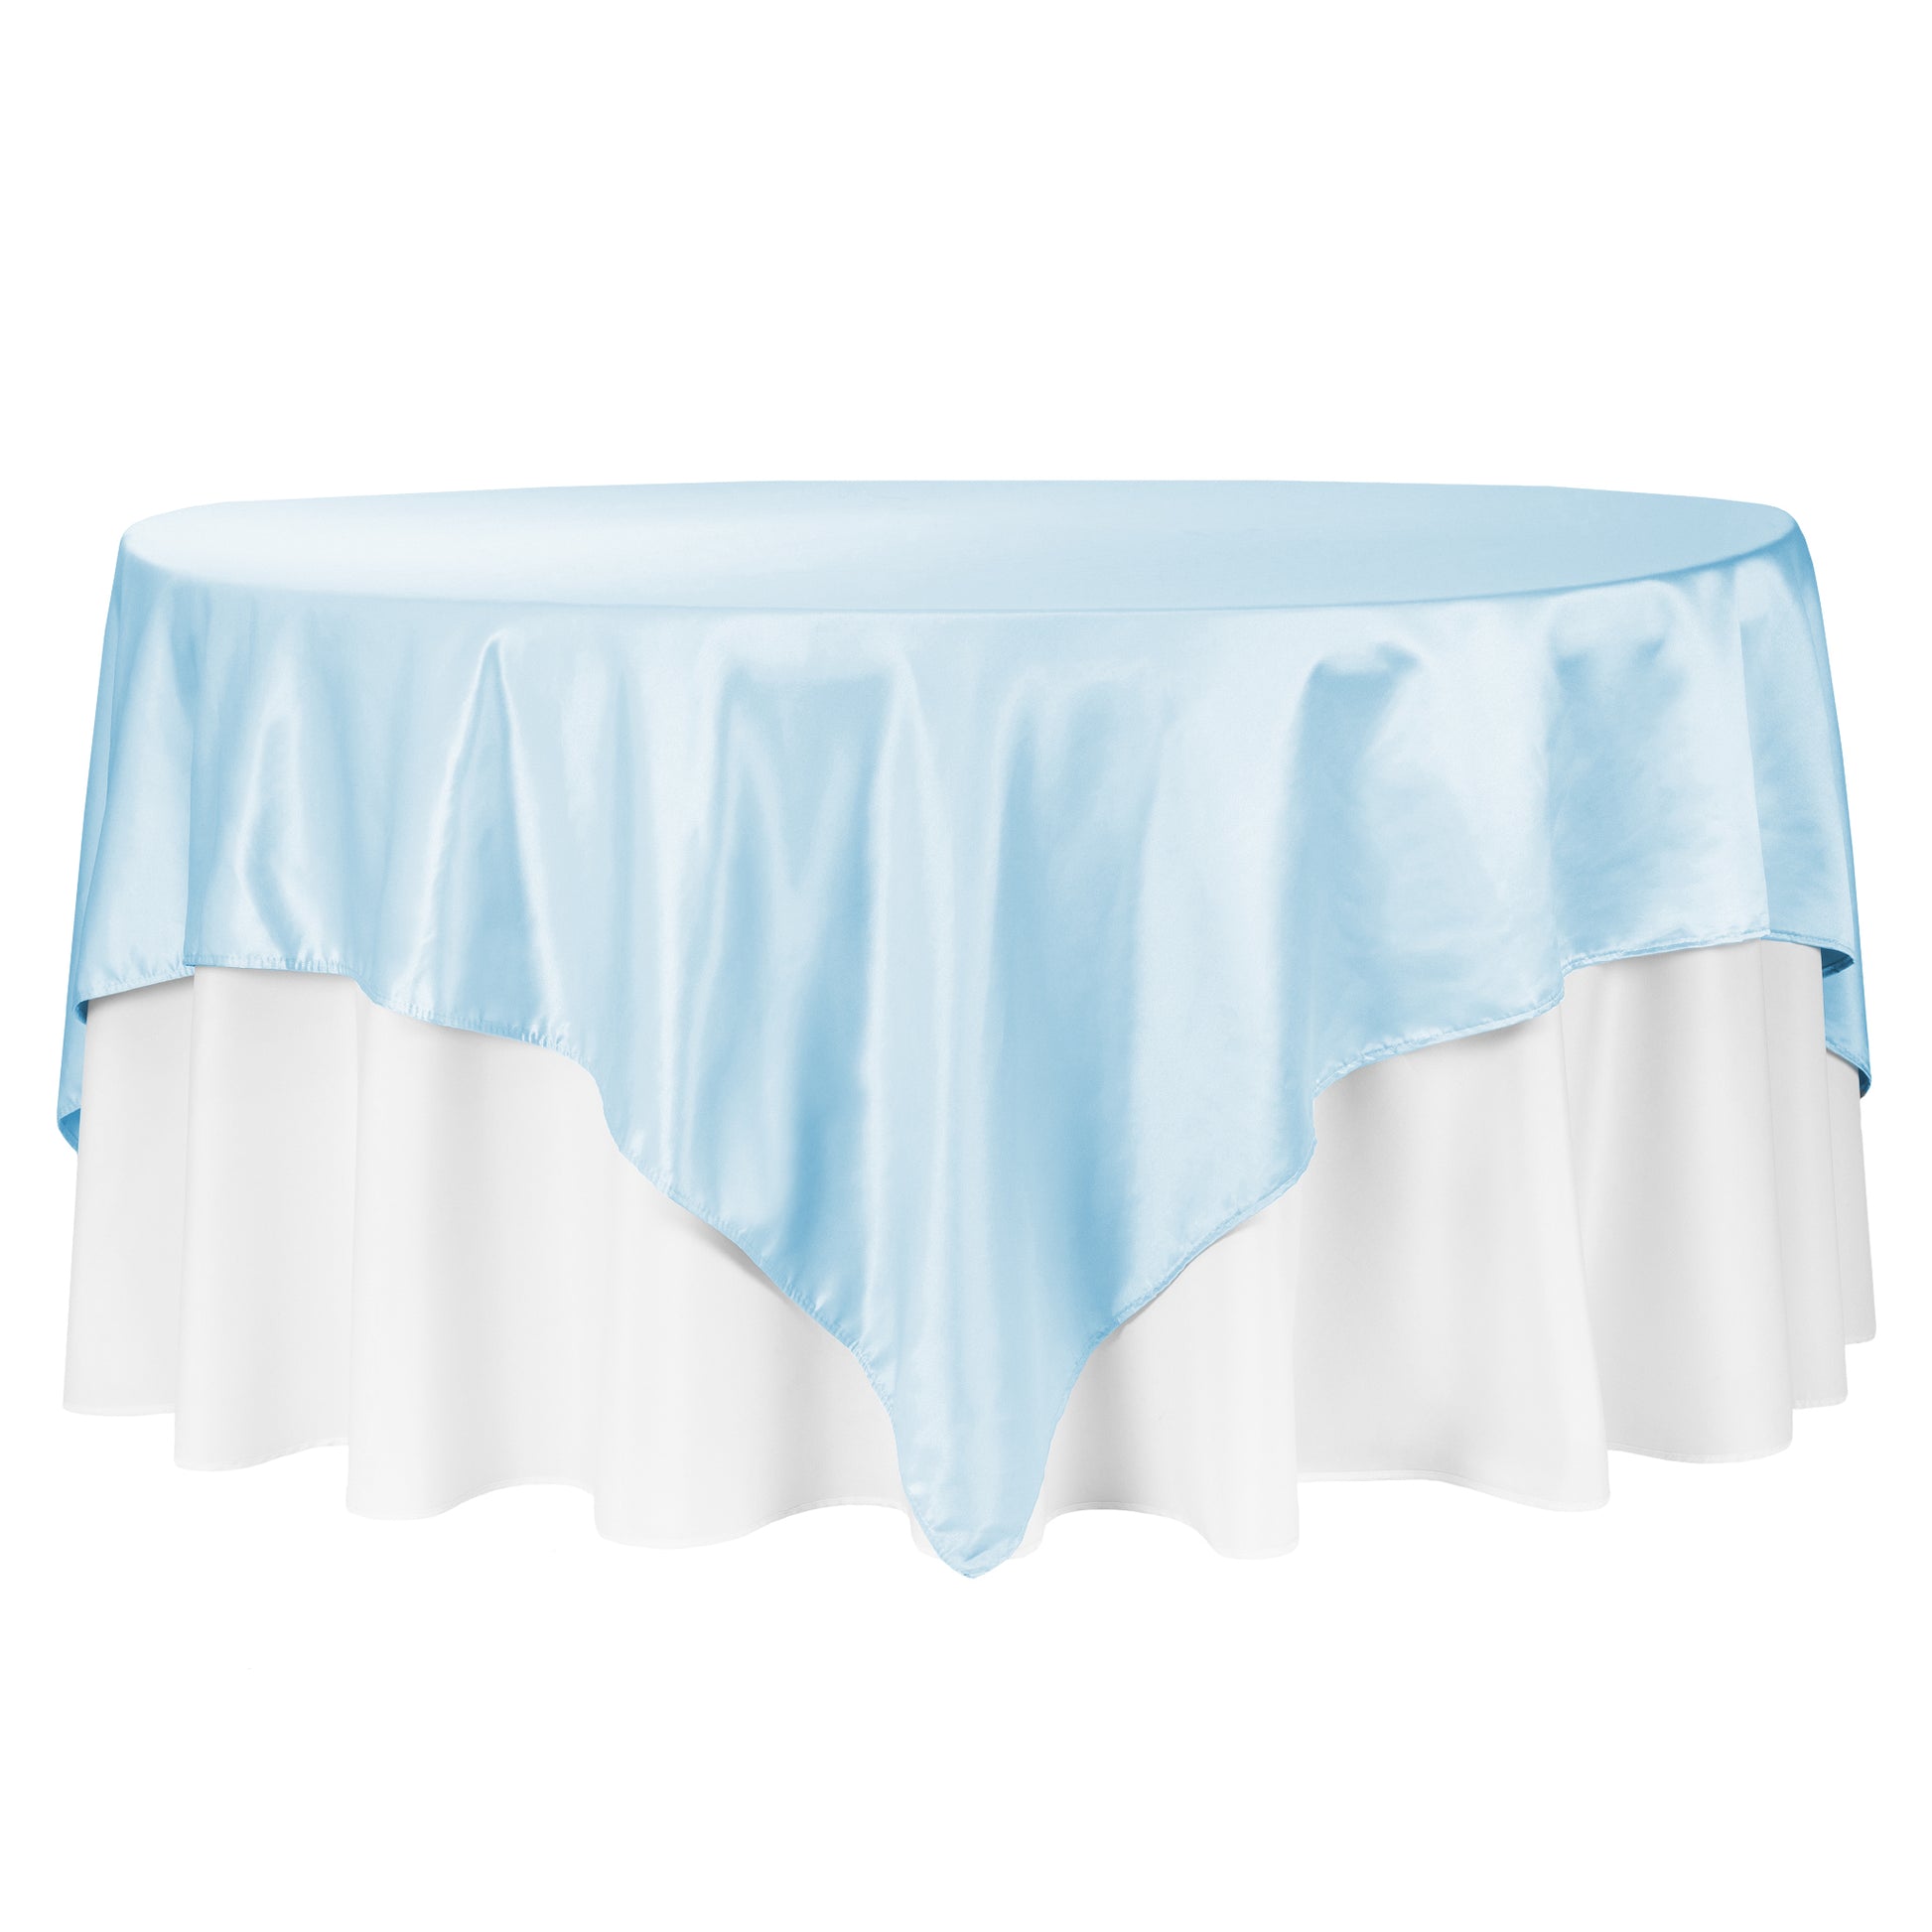 Square 90"x90" Lamour Satin Table Overlay - Baby Blue - CV Linens